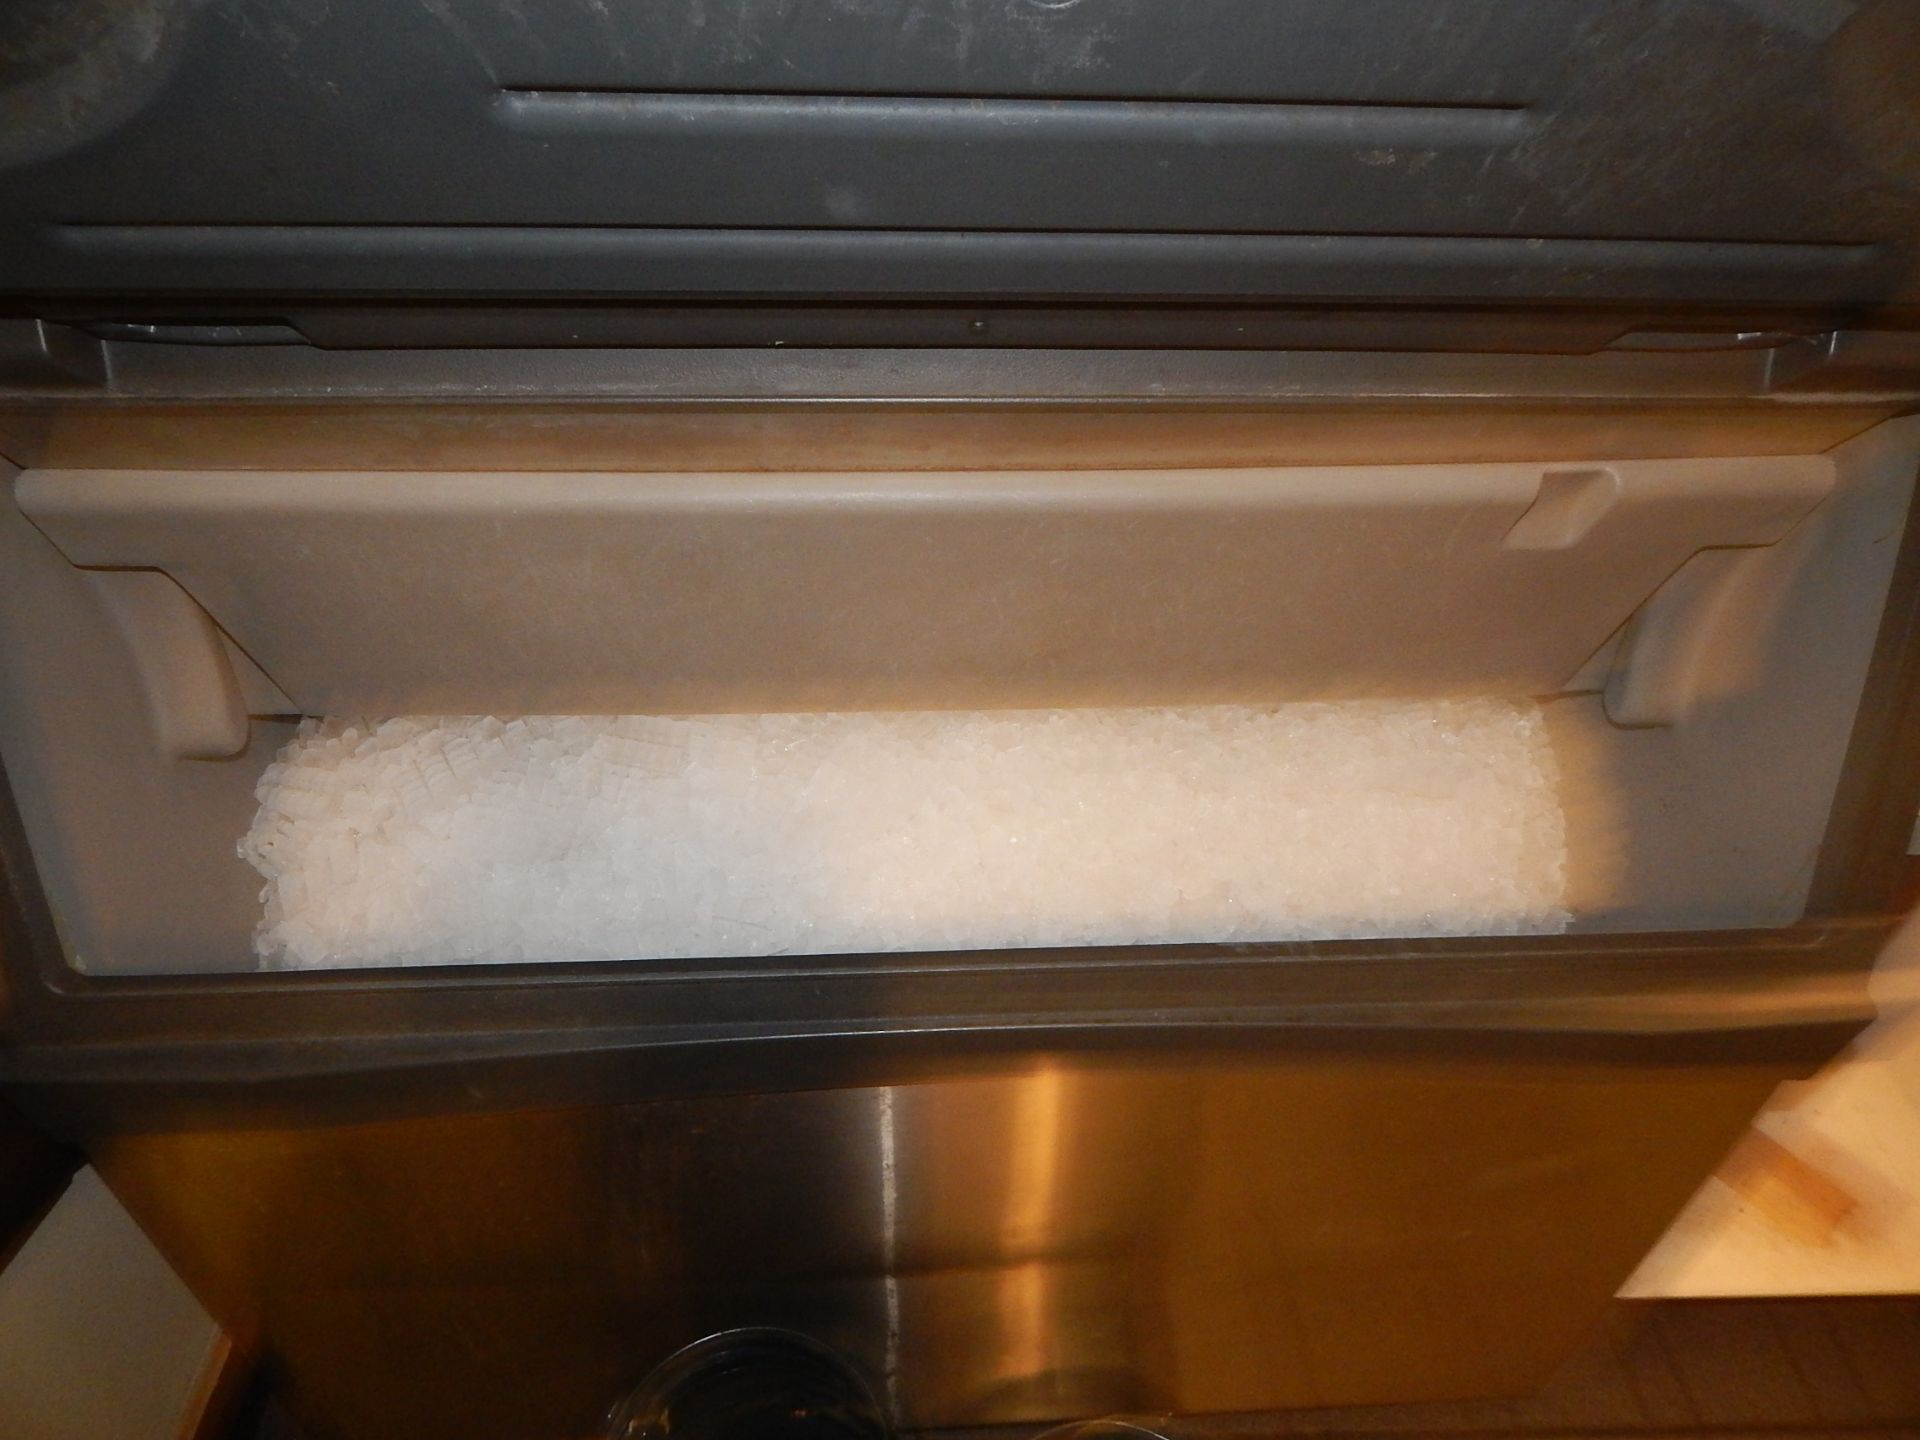 Scotsman Prodigy Ice Machine with Scoops and Ice Buckets - Image 4 of 4